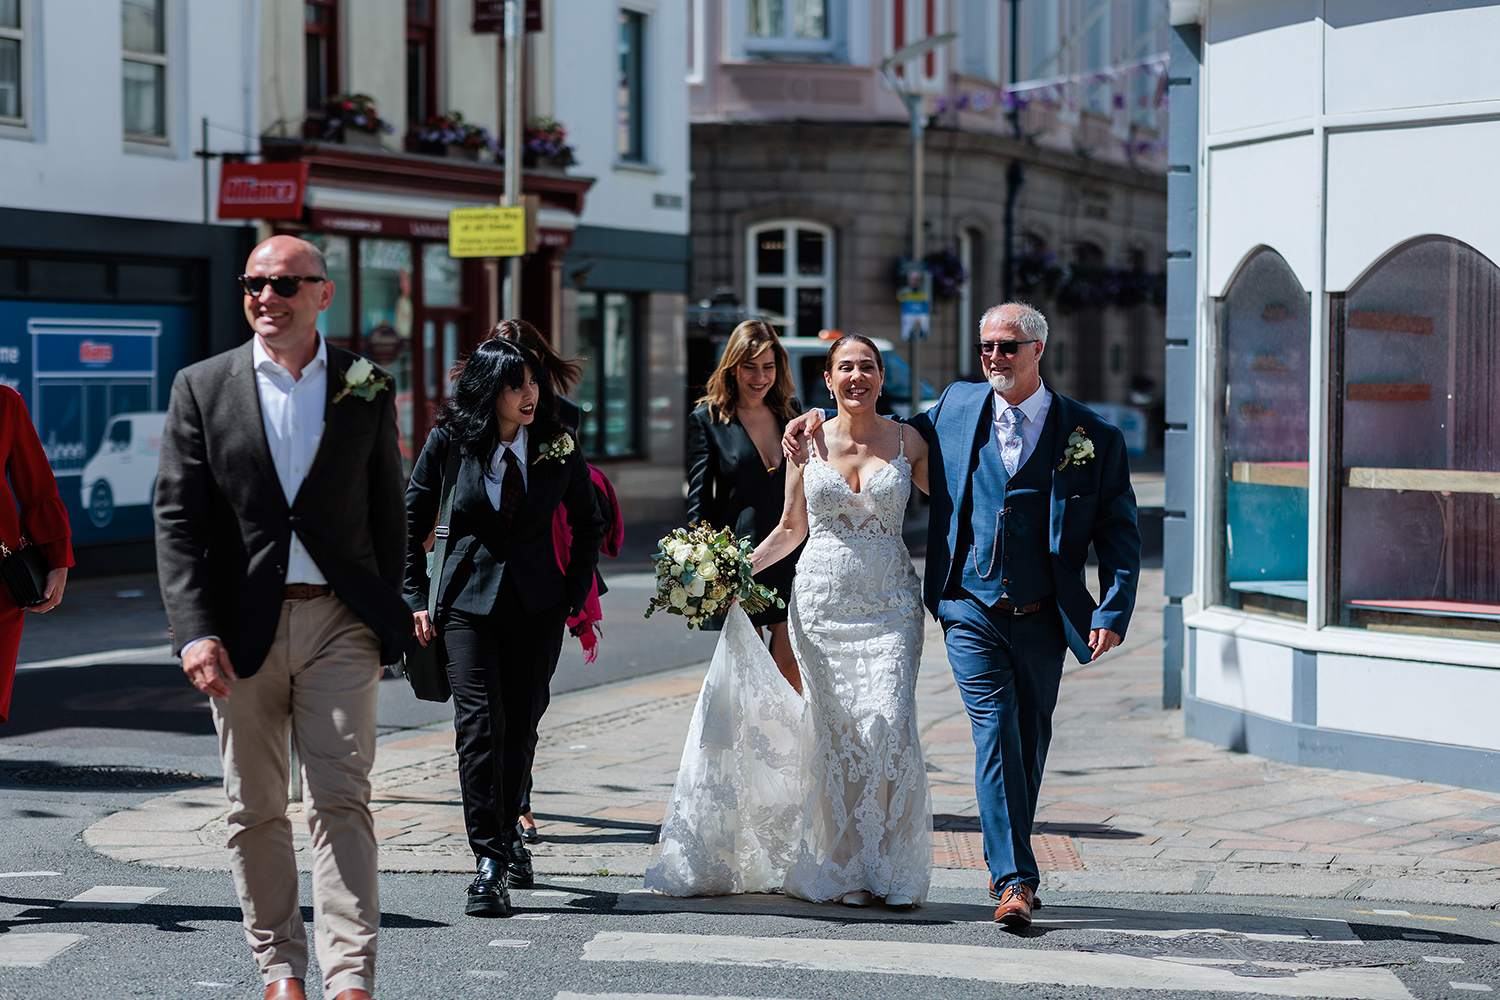 Steve and Berenice look so happy as they have become husband and wife after their wedding ceremony at The Old Magistrates Court, Jersey CI.